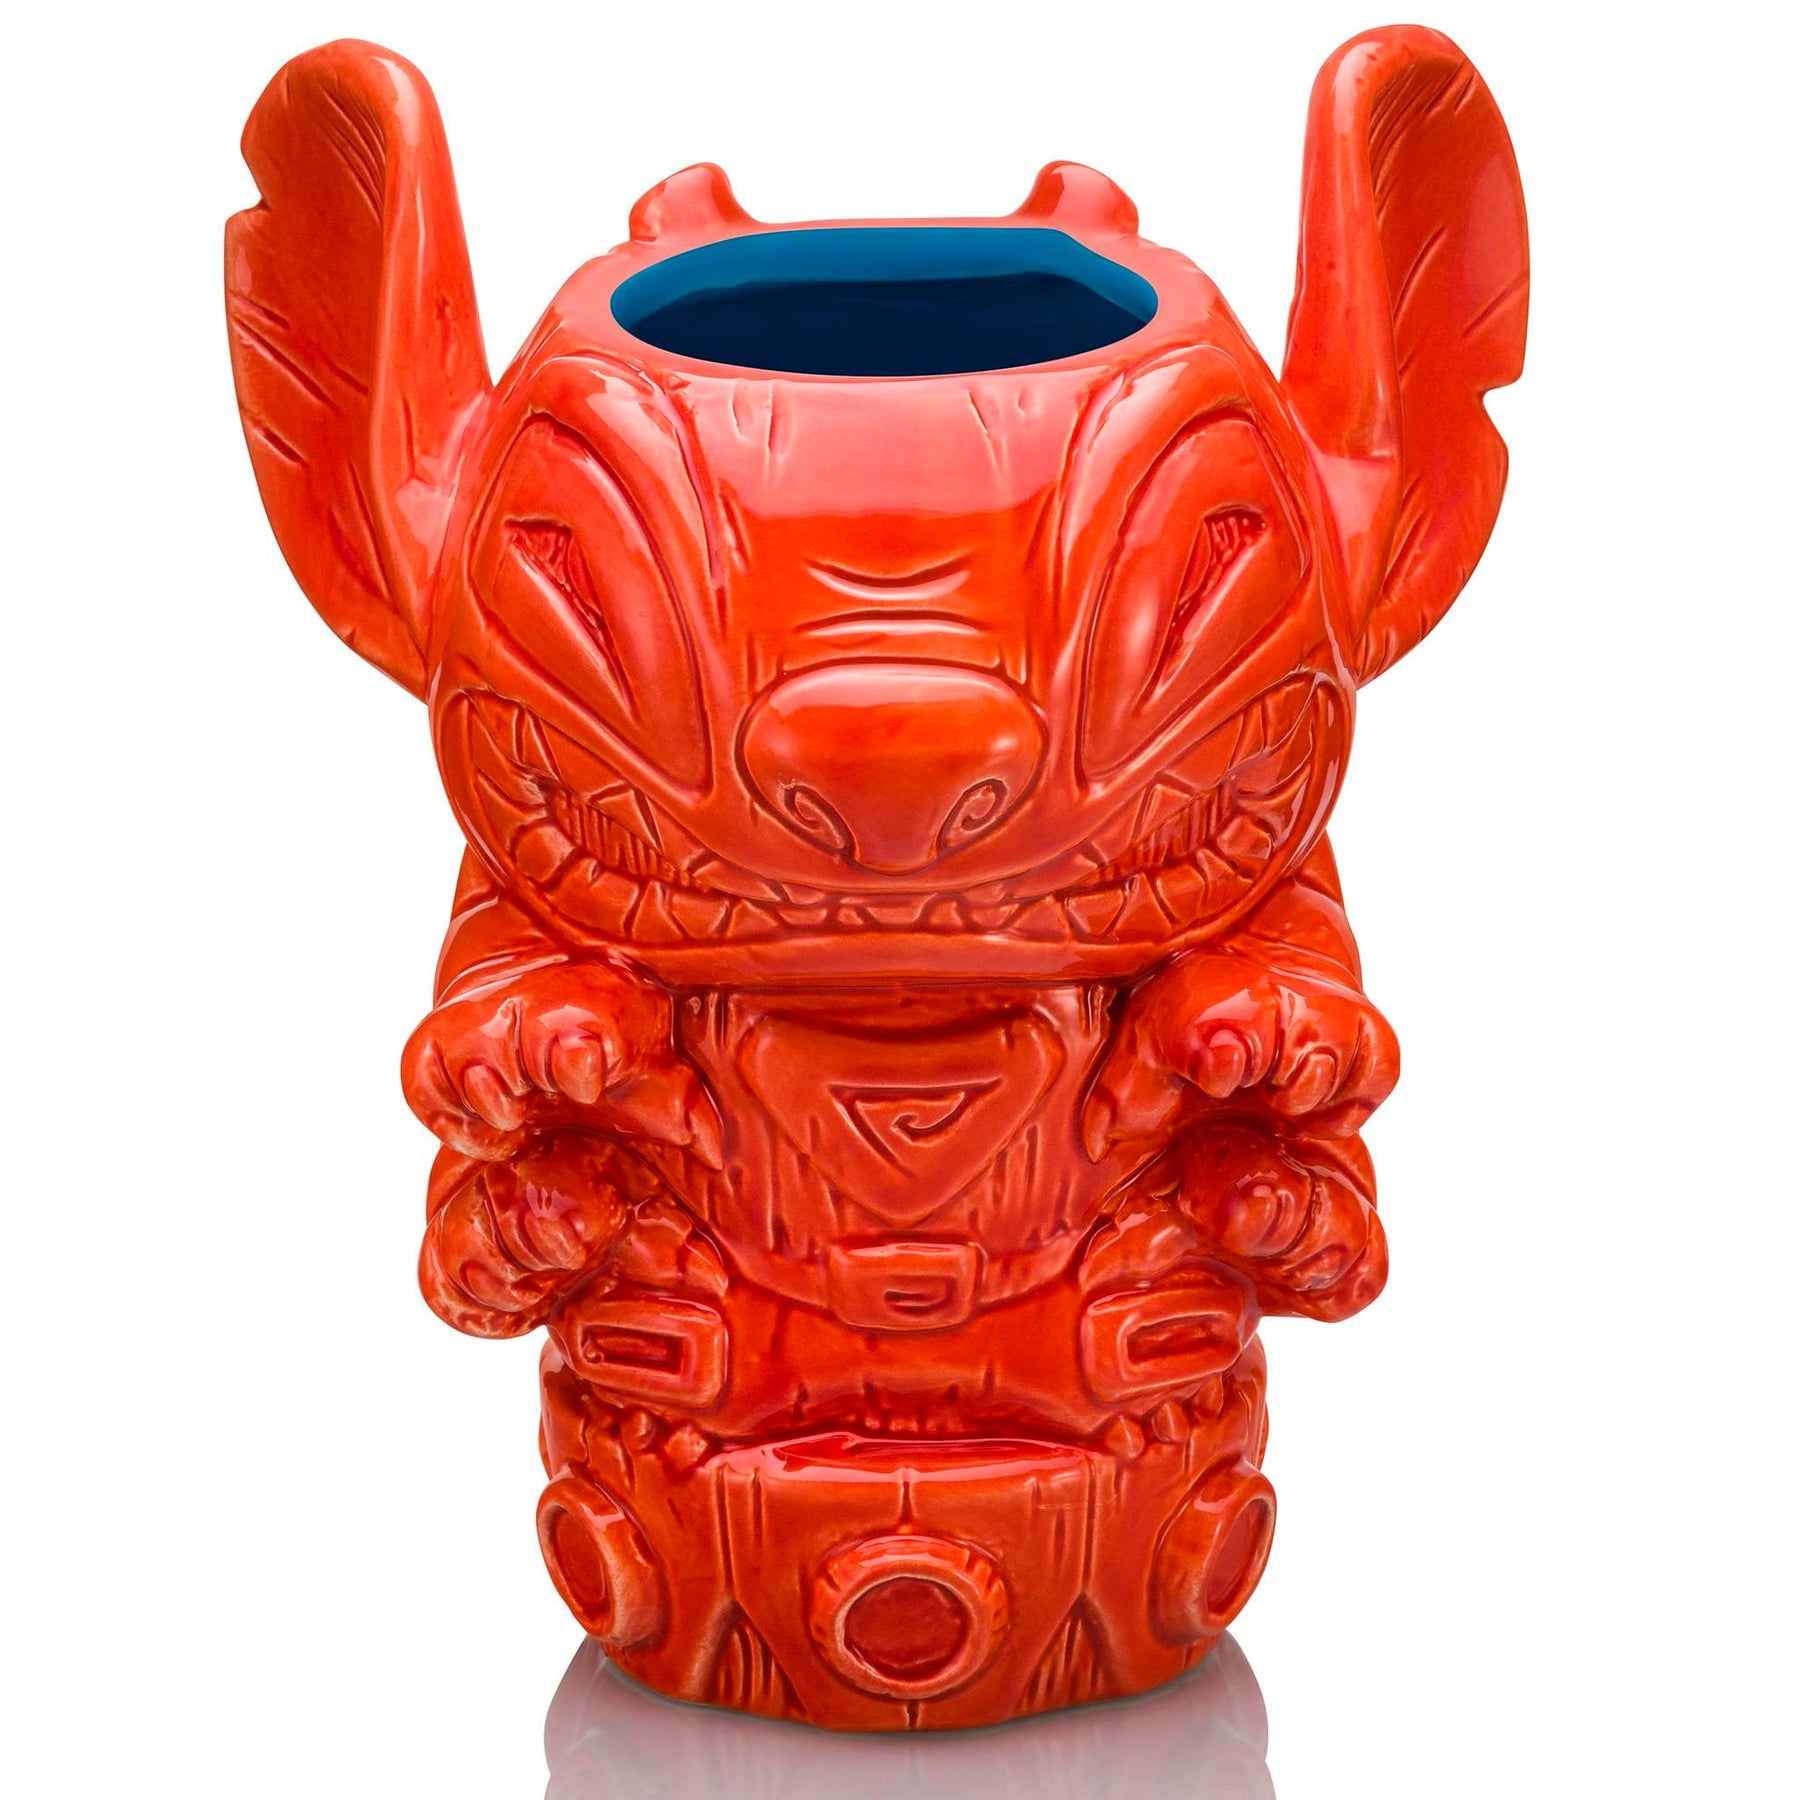 Official Disney Store 3D Stitch Figural Mug From Lilo And Stitch